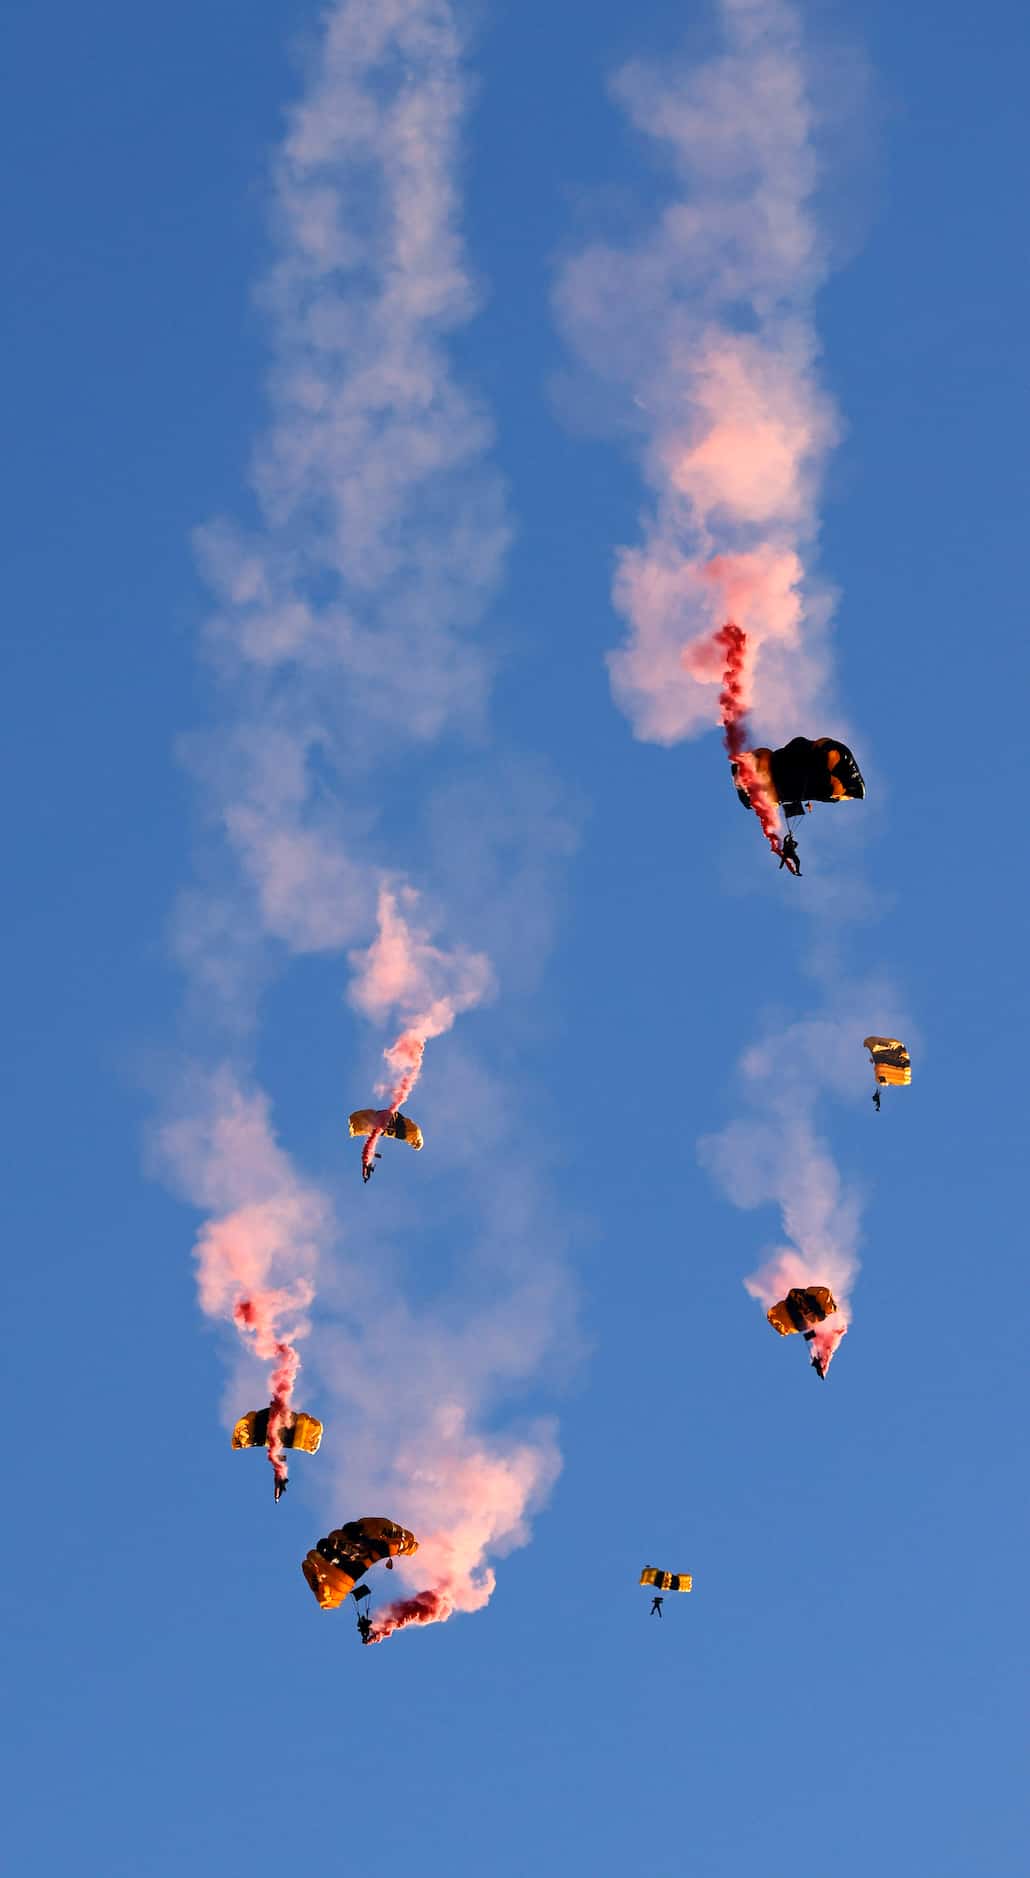 Members of the Army Golden Knights parachute team peform a jump with the Texas flag  before...